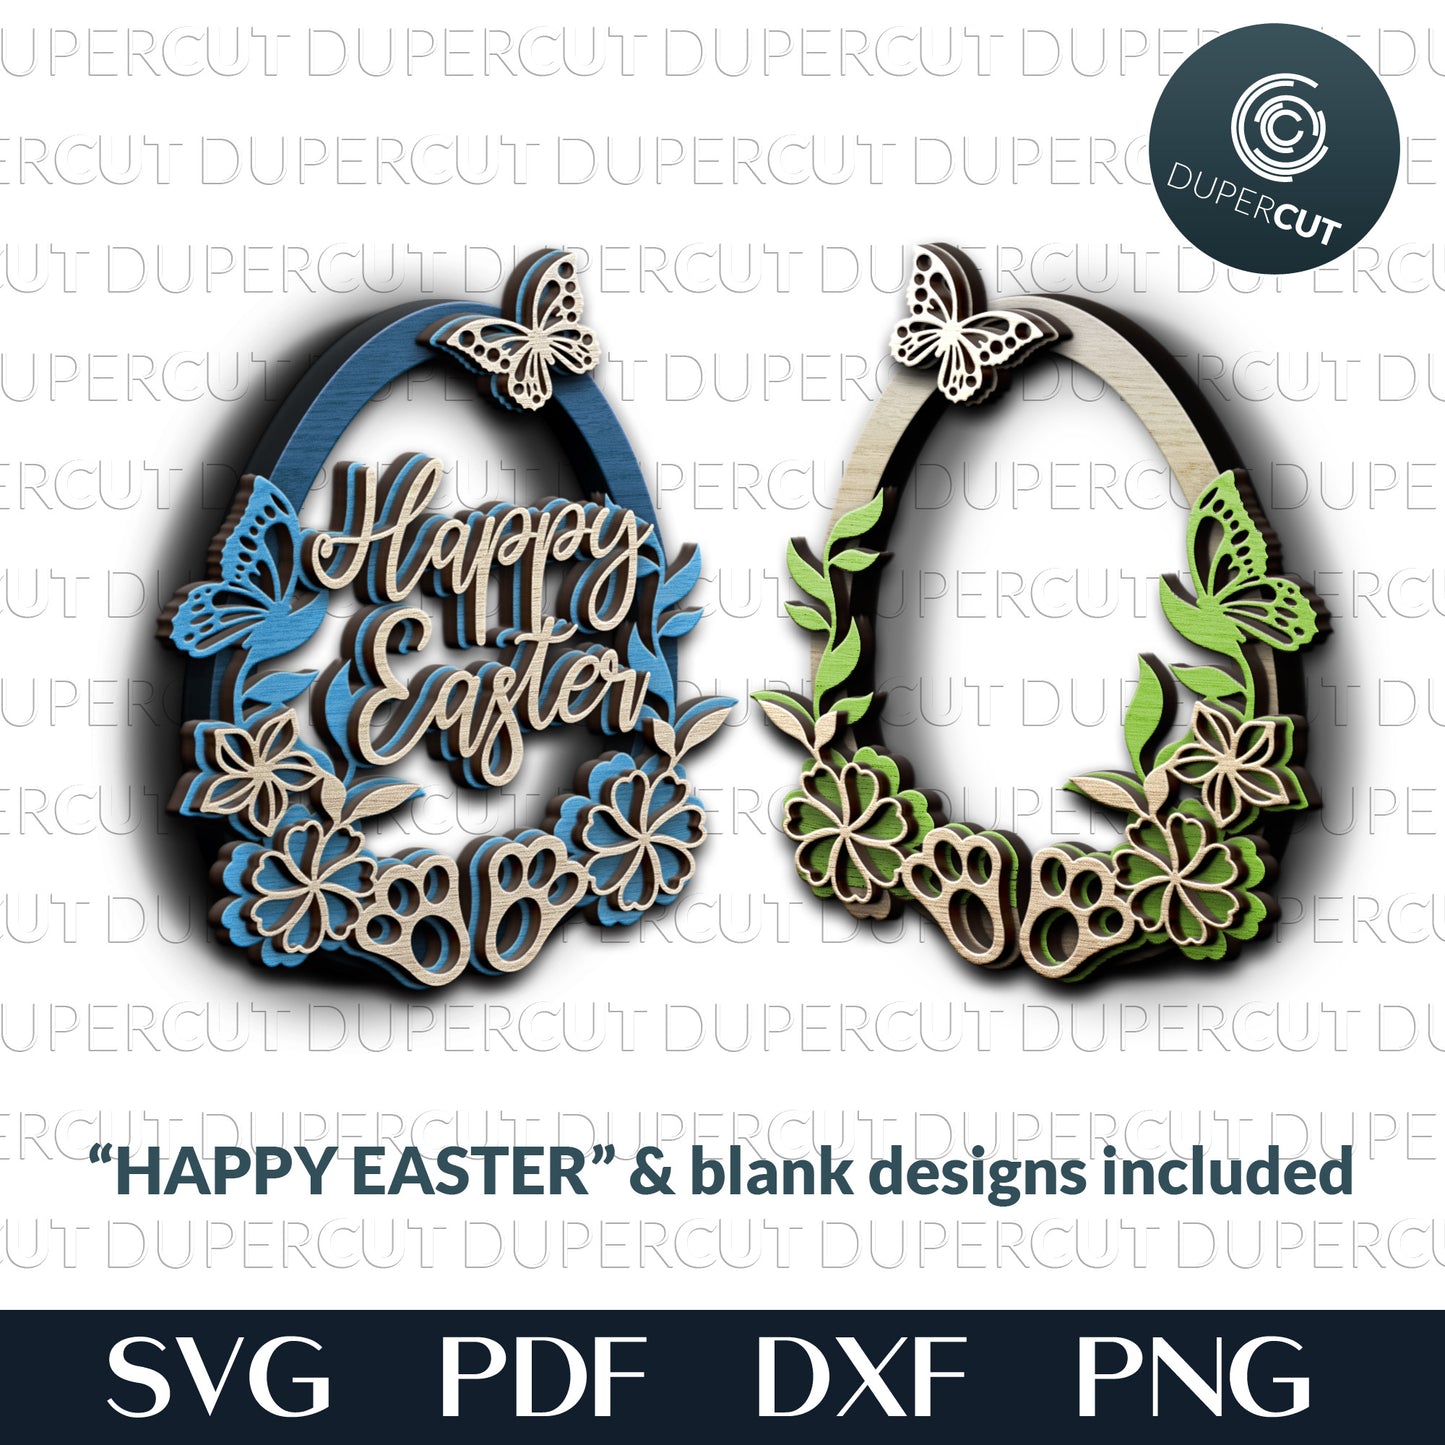 Easter egg with flowers and bunny feet - add custom text  - SVG PDF DXF layered cutting files for Cricut, Silhouette Cameo, Glowforge laser, CNC plasma machines